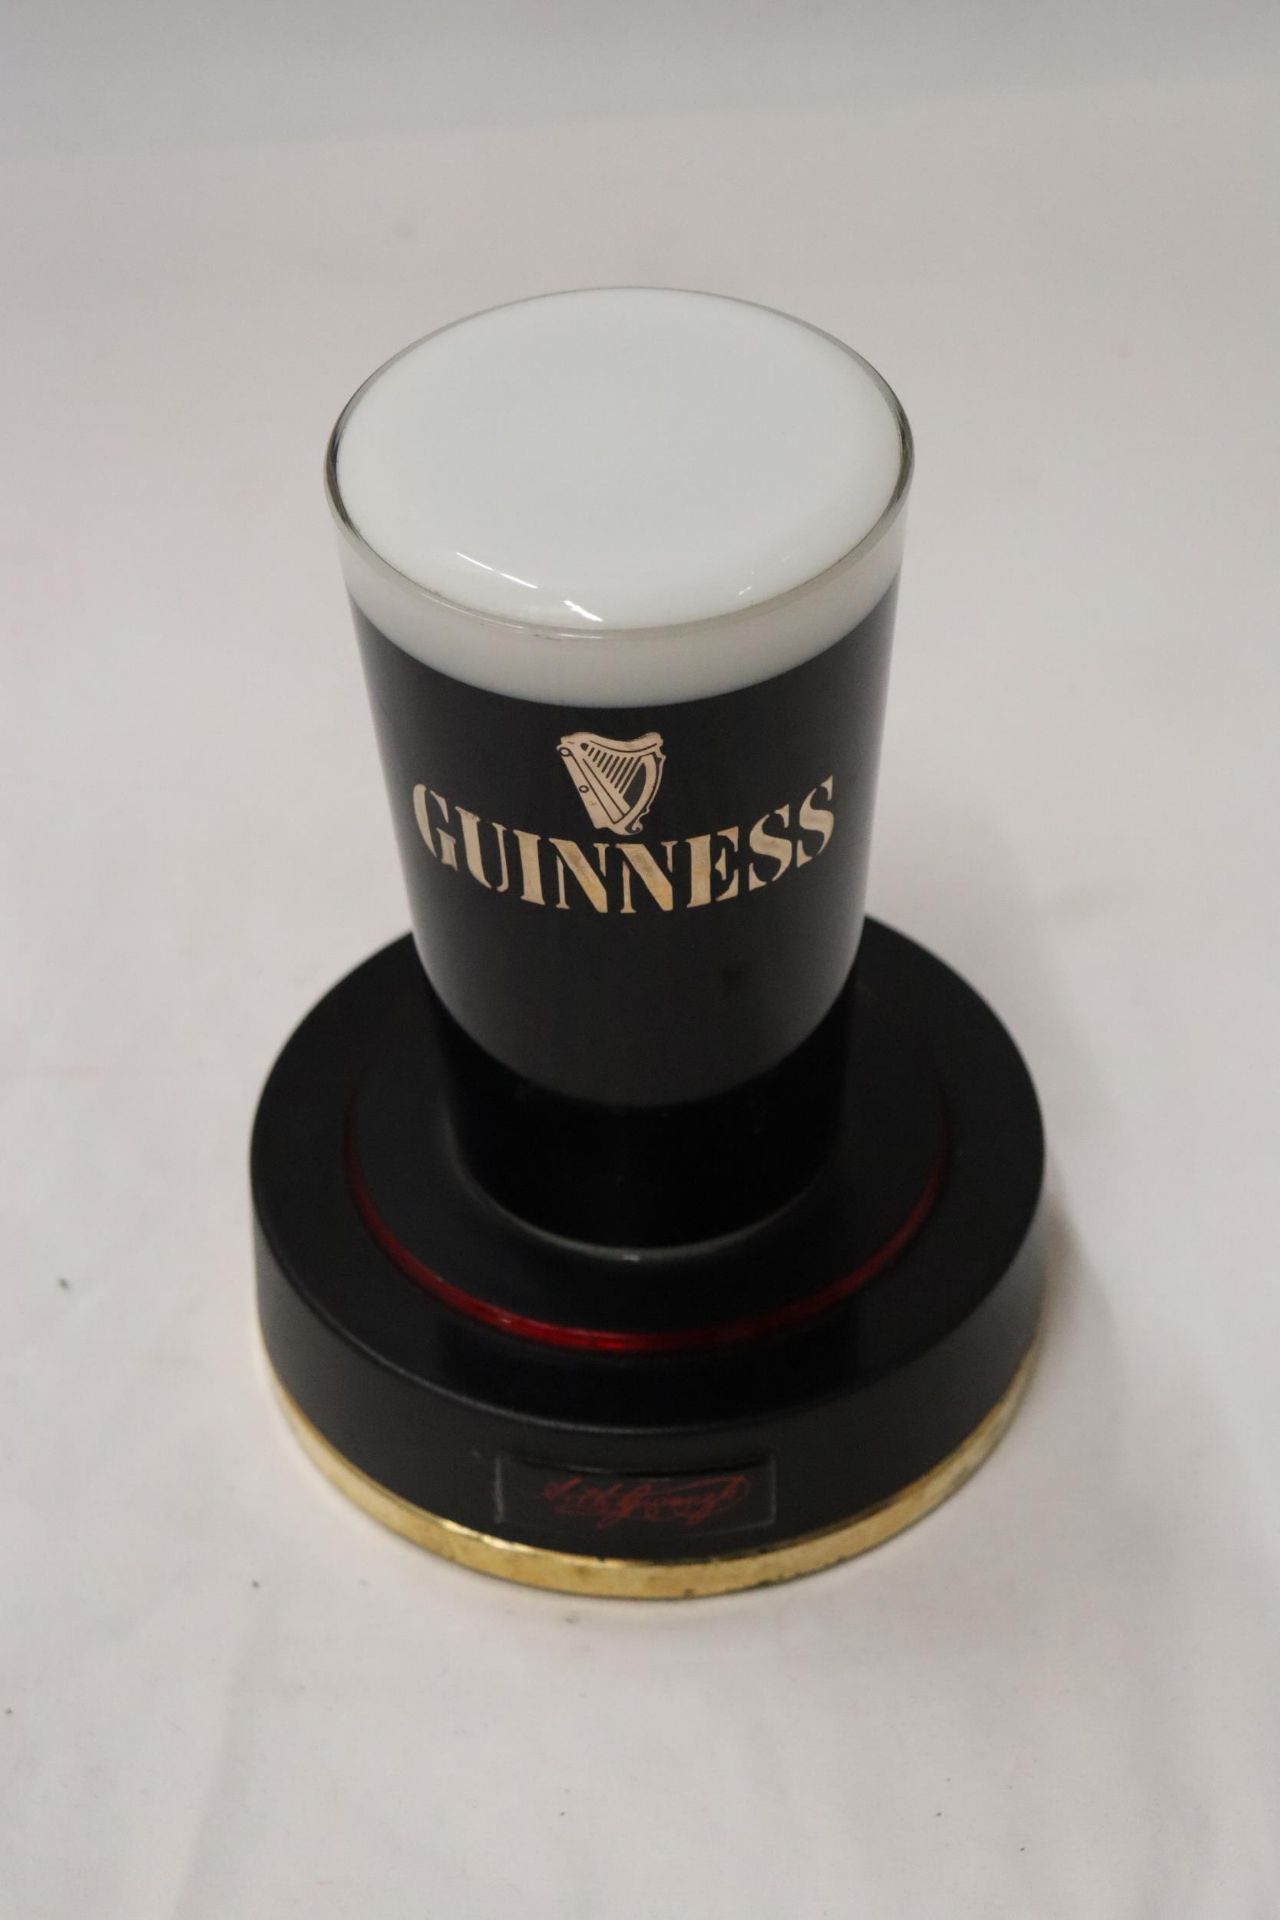 A RARE GUINNESS, LIGHT UP COUNTER SIGN, IN THE FORM OF A PINT GLASS, HEIGHT 18CM - Image 5 of 5